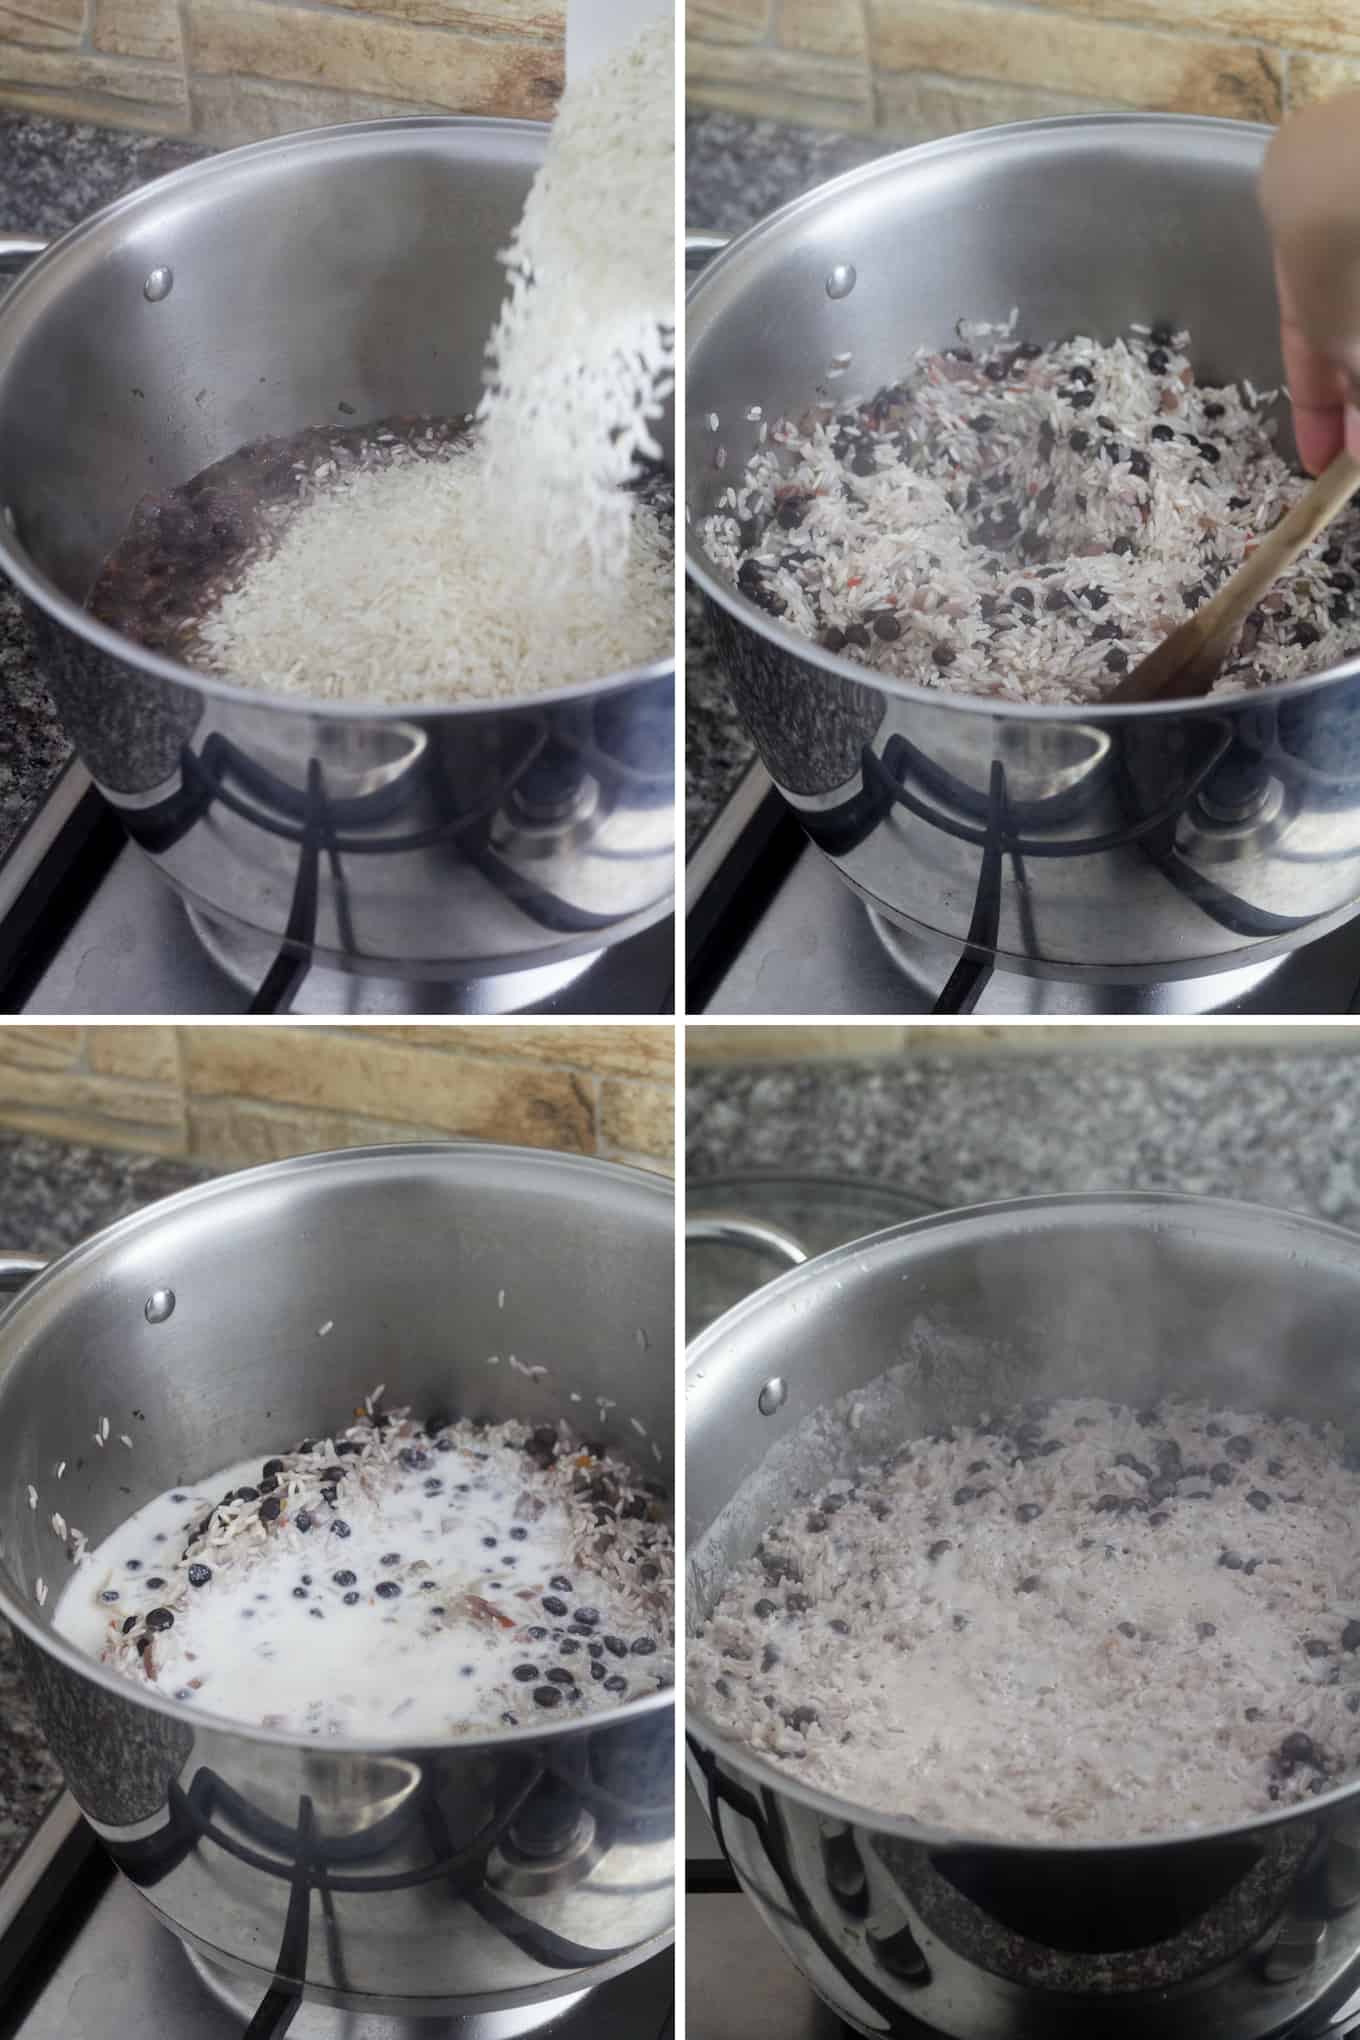 A collage of images, adding the rice to the pot, mixing the rice ingredients, adding coconut milk, and cooking coconut rice with pigeon peas.